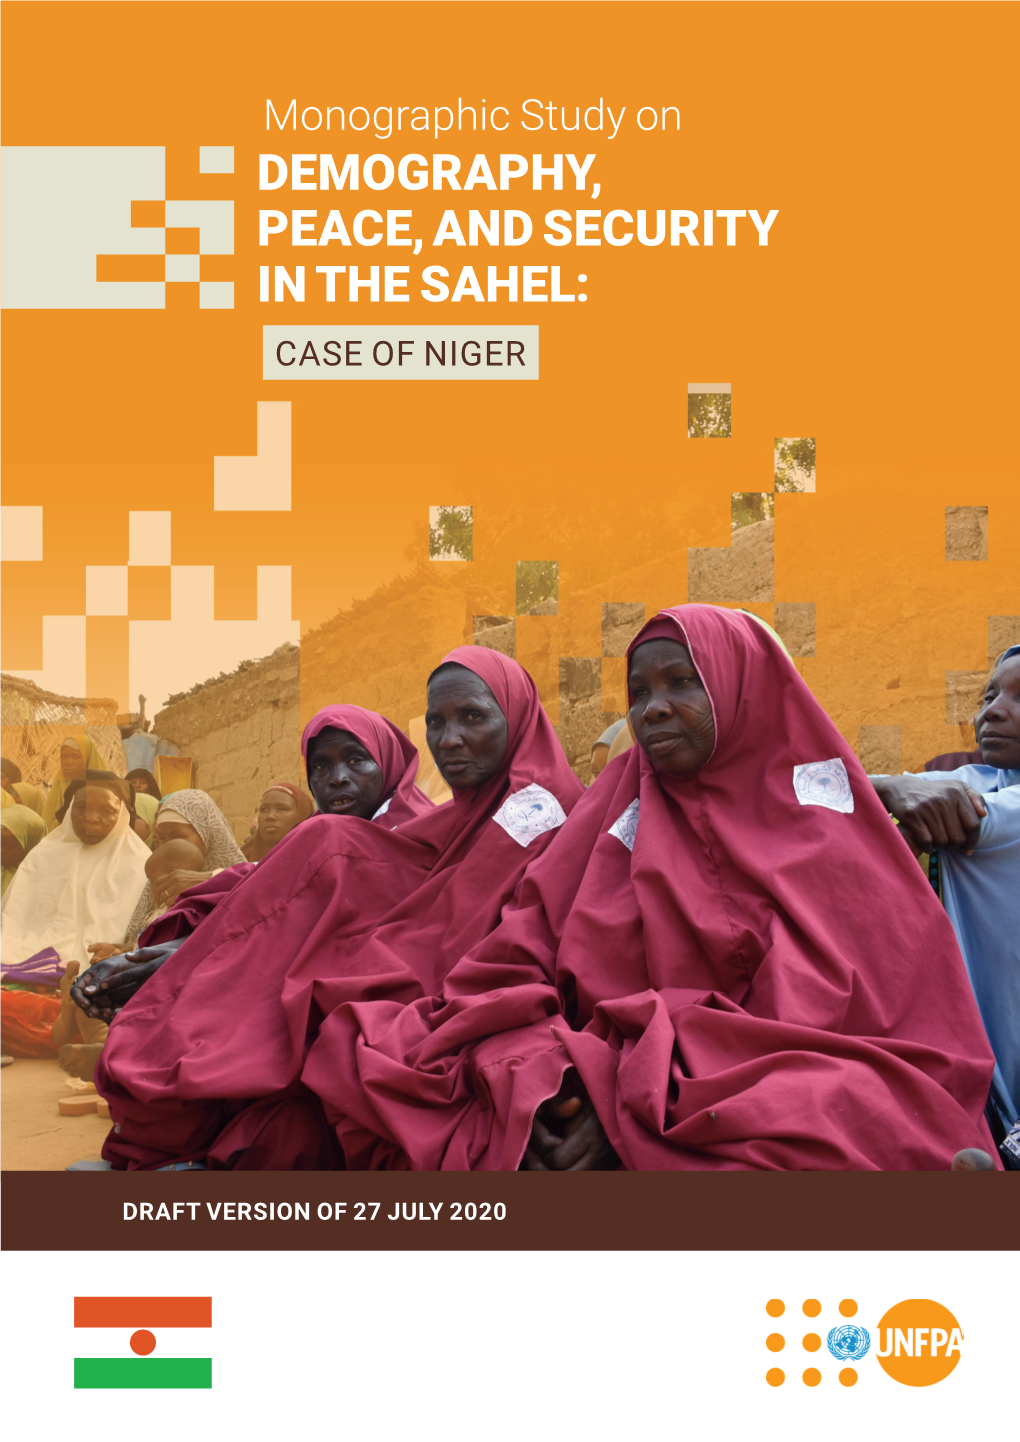 Demography, Peace, and Security in the Sahel: Case of Niger